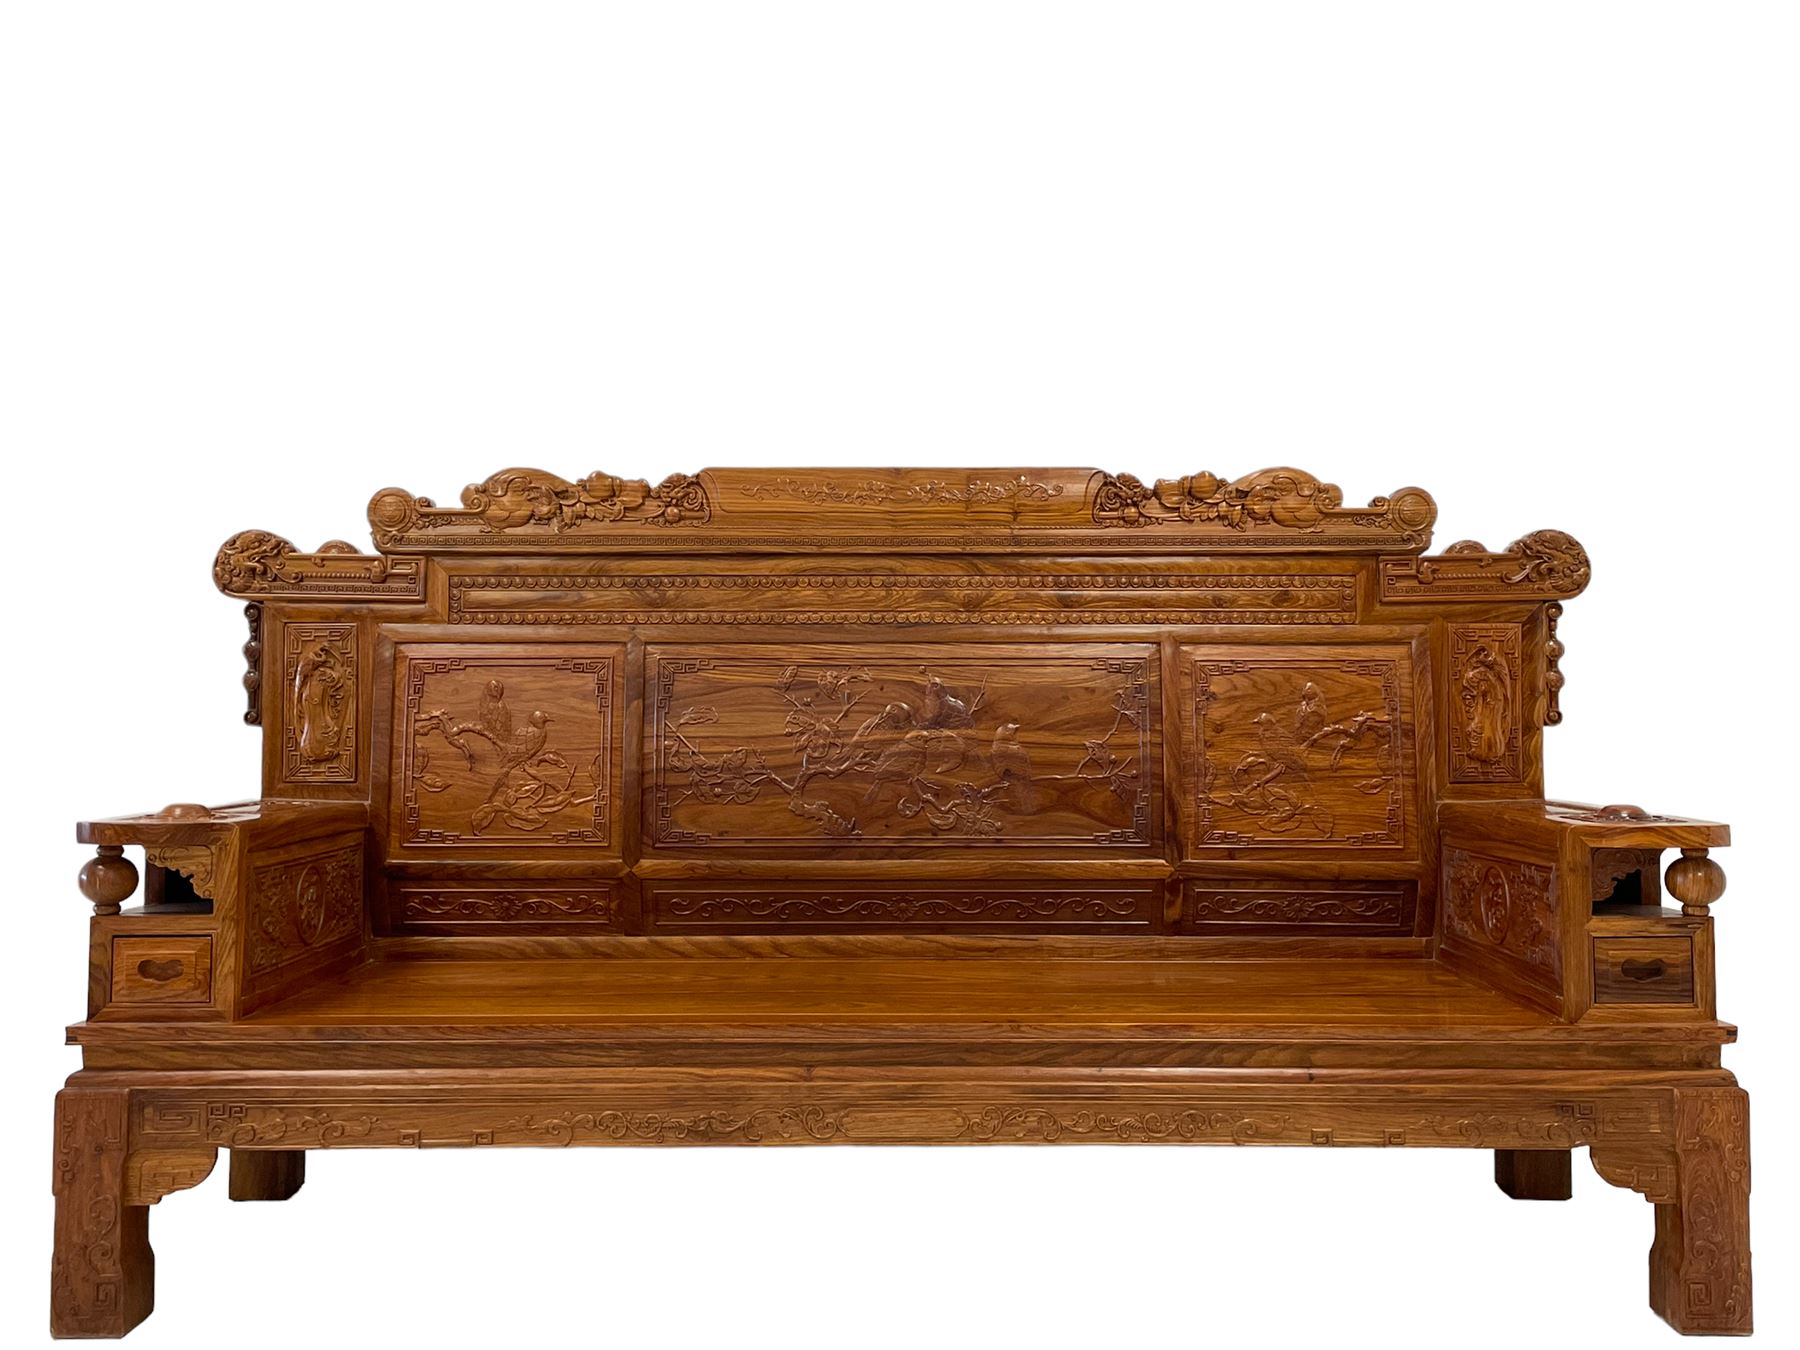 Chinese Imperial style hardwood throne room settee or sofa - Image 9 of 9